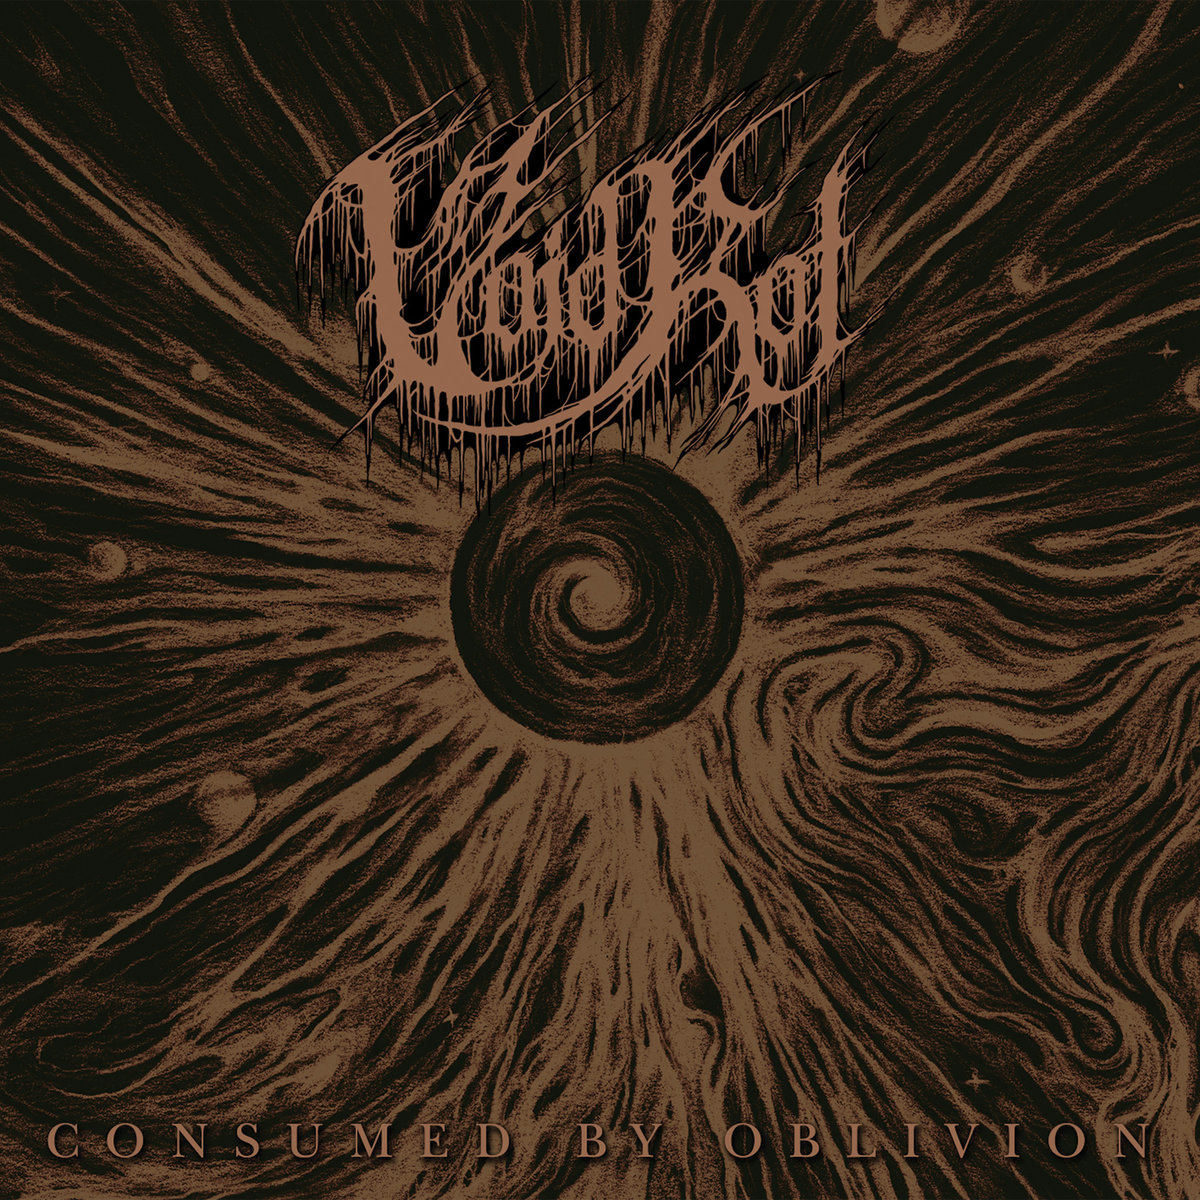 Void Rot – Consumed By Oblivion